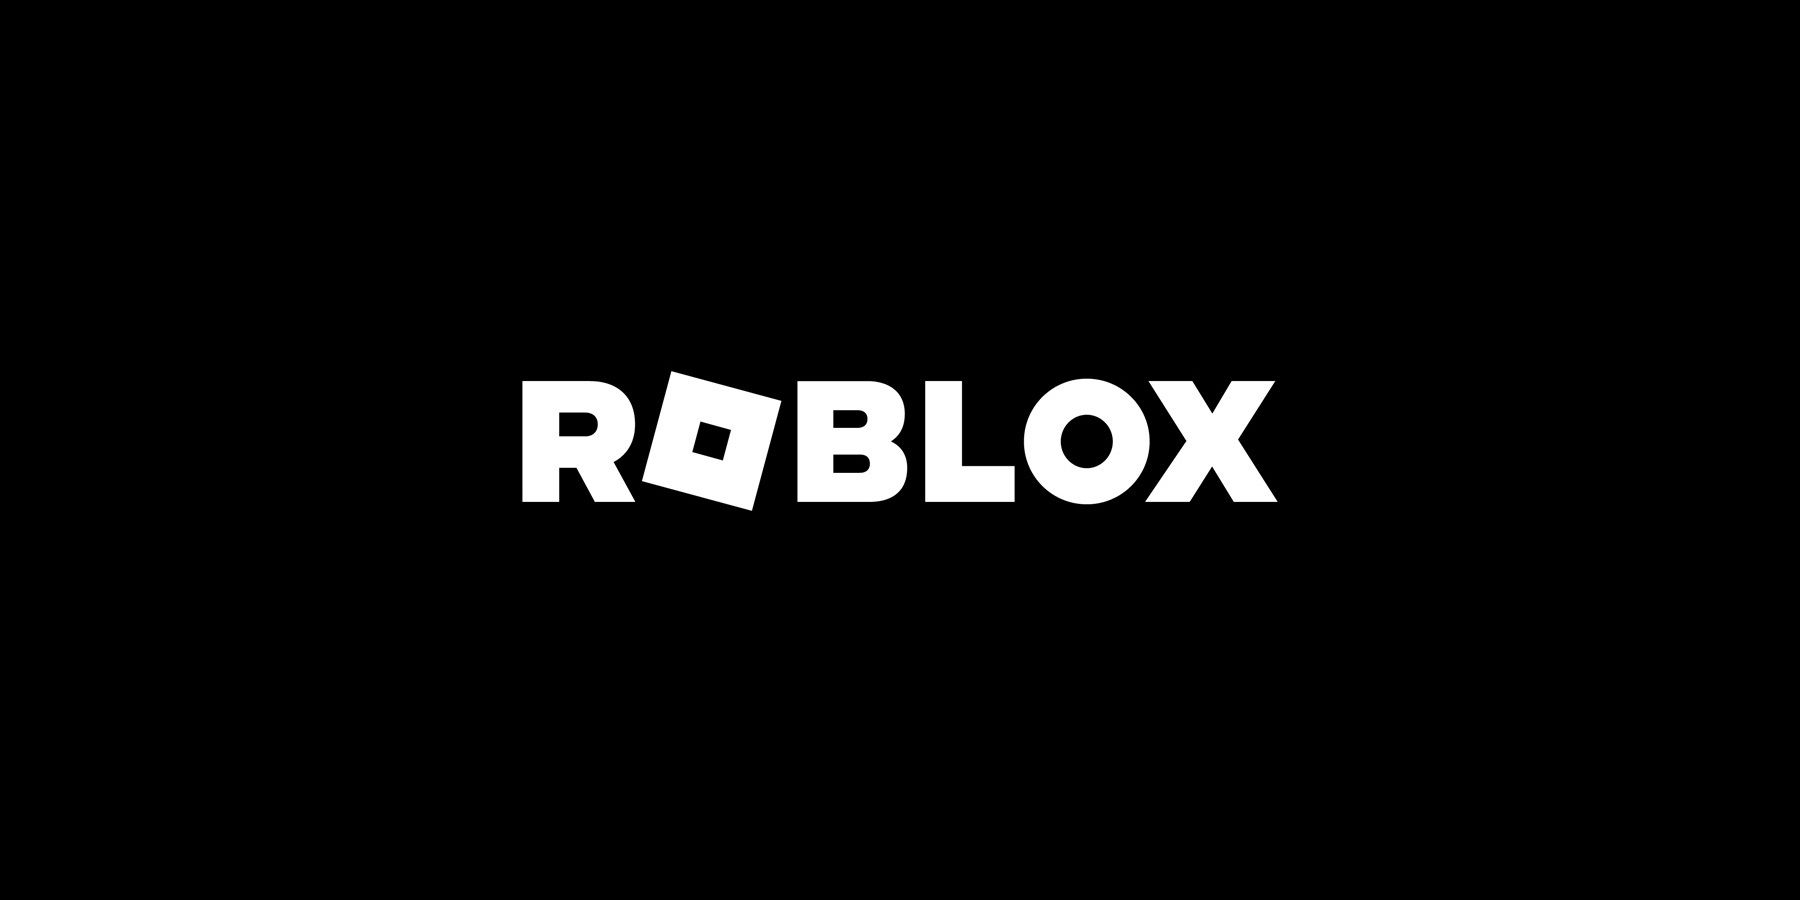 roblox-faces-lawsuit-from-players-parents-over-harmful-content